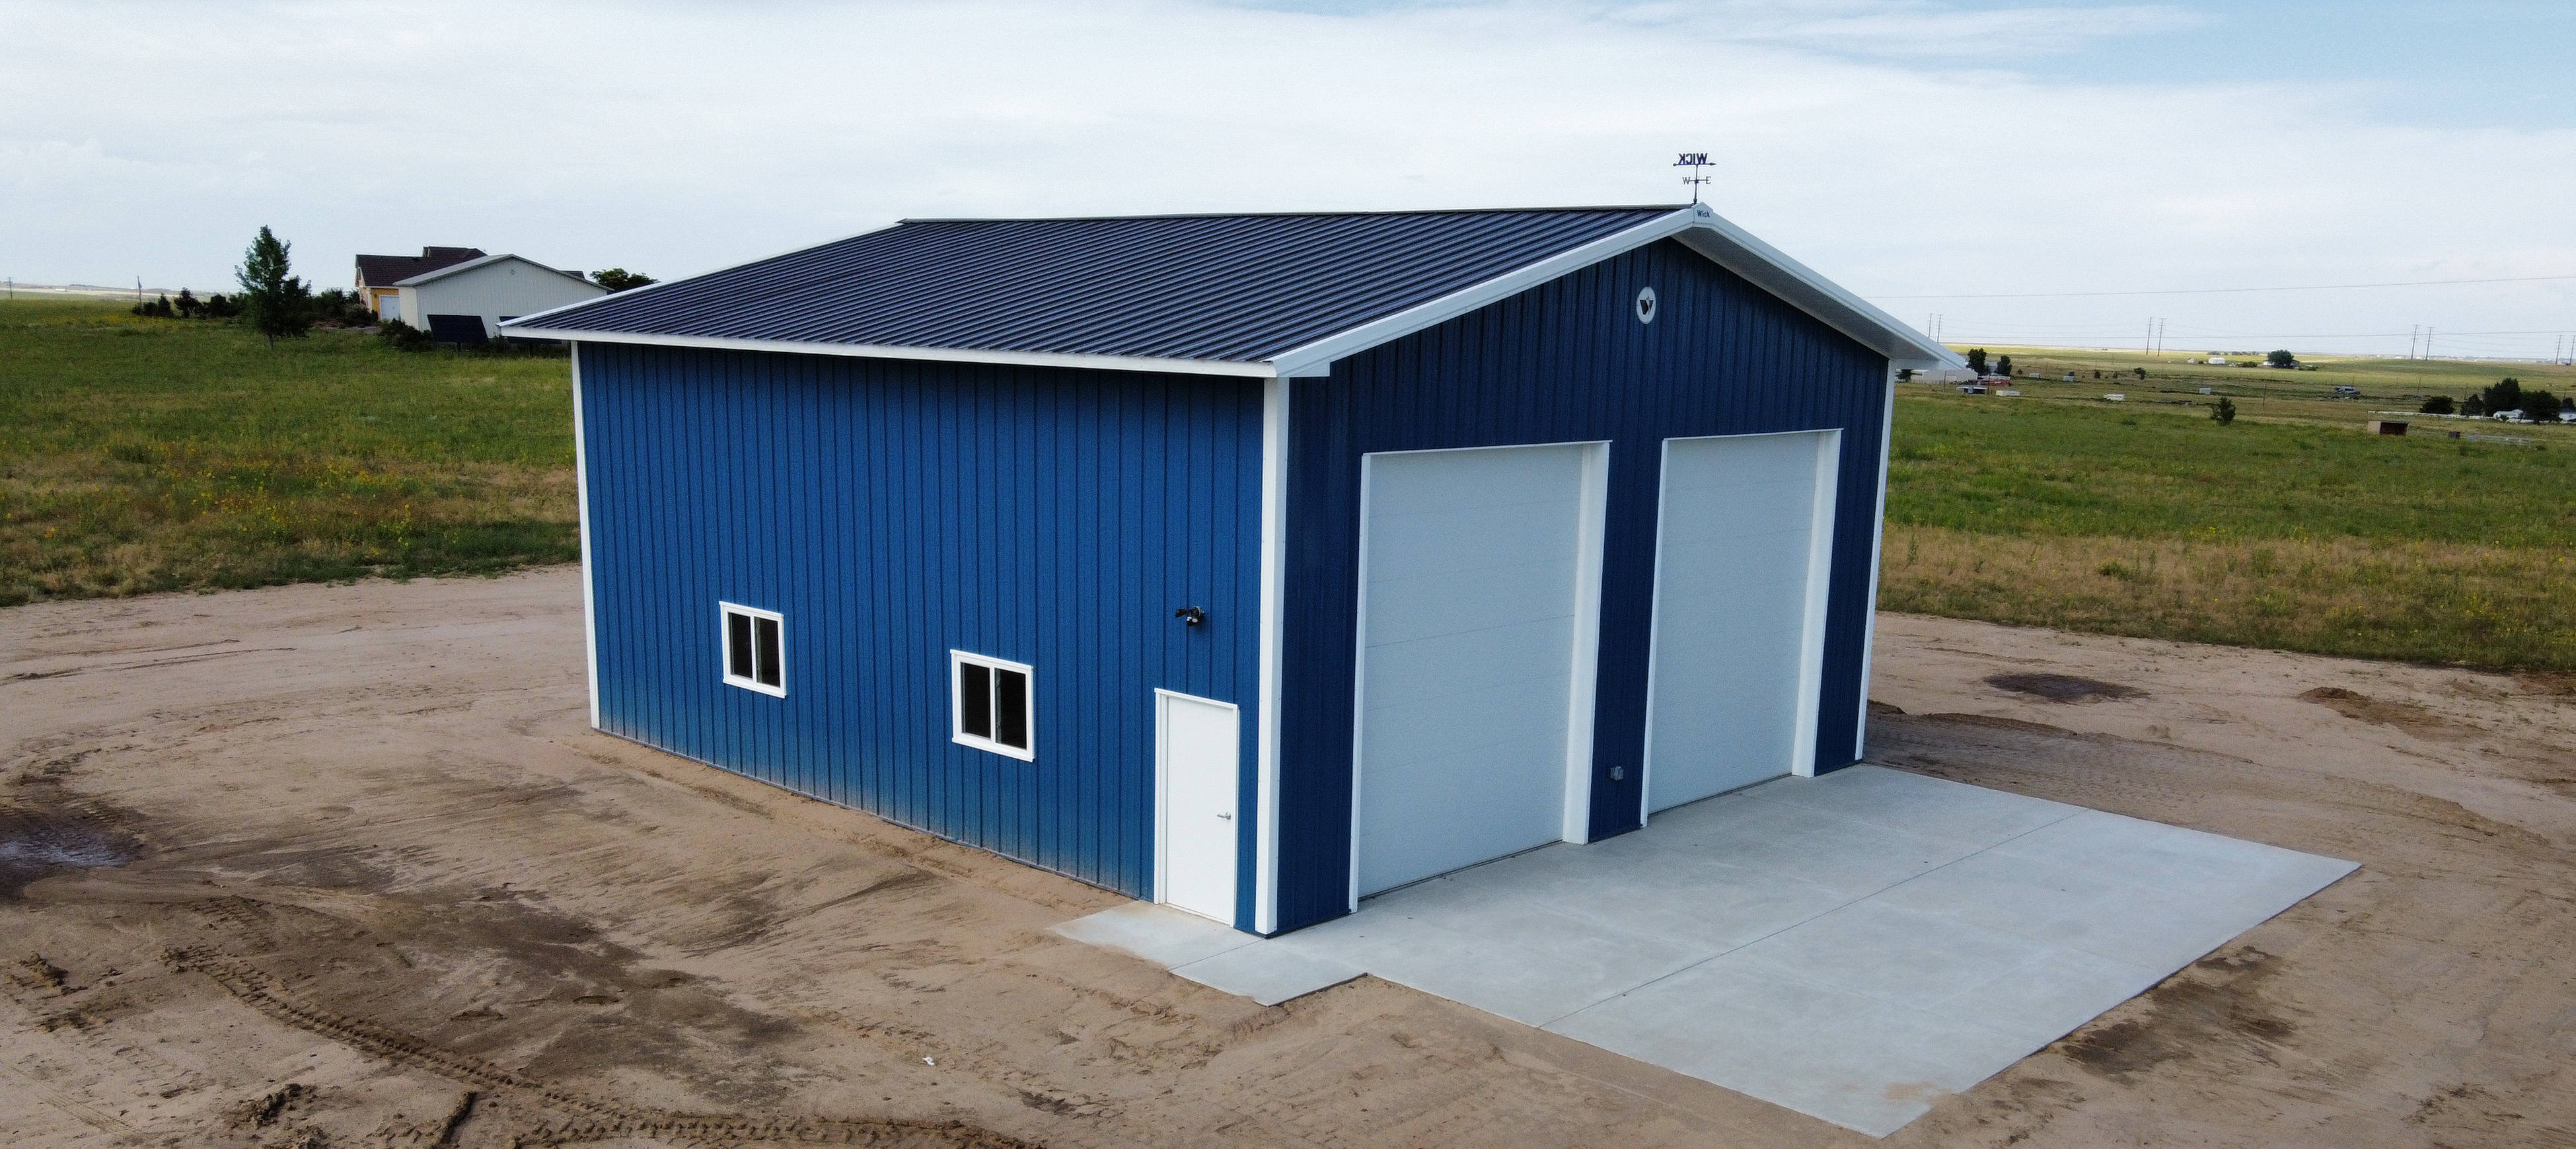 Fat Puppy construction's featured project of a blue and white, two-story suburban post frame building